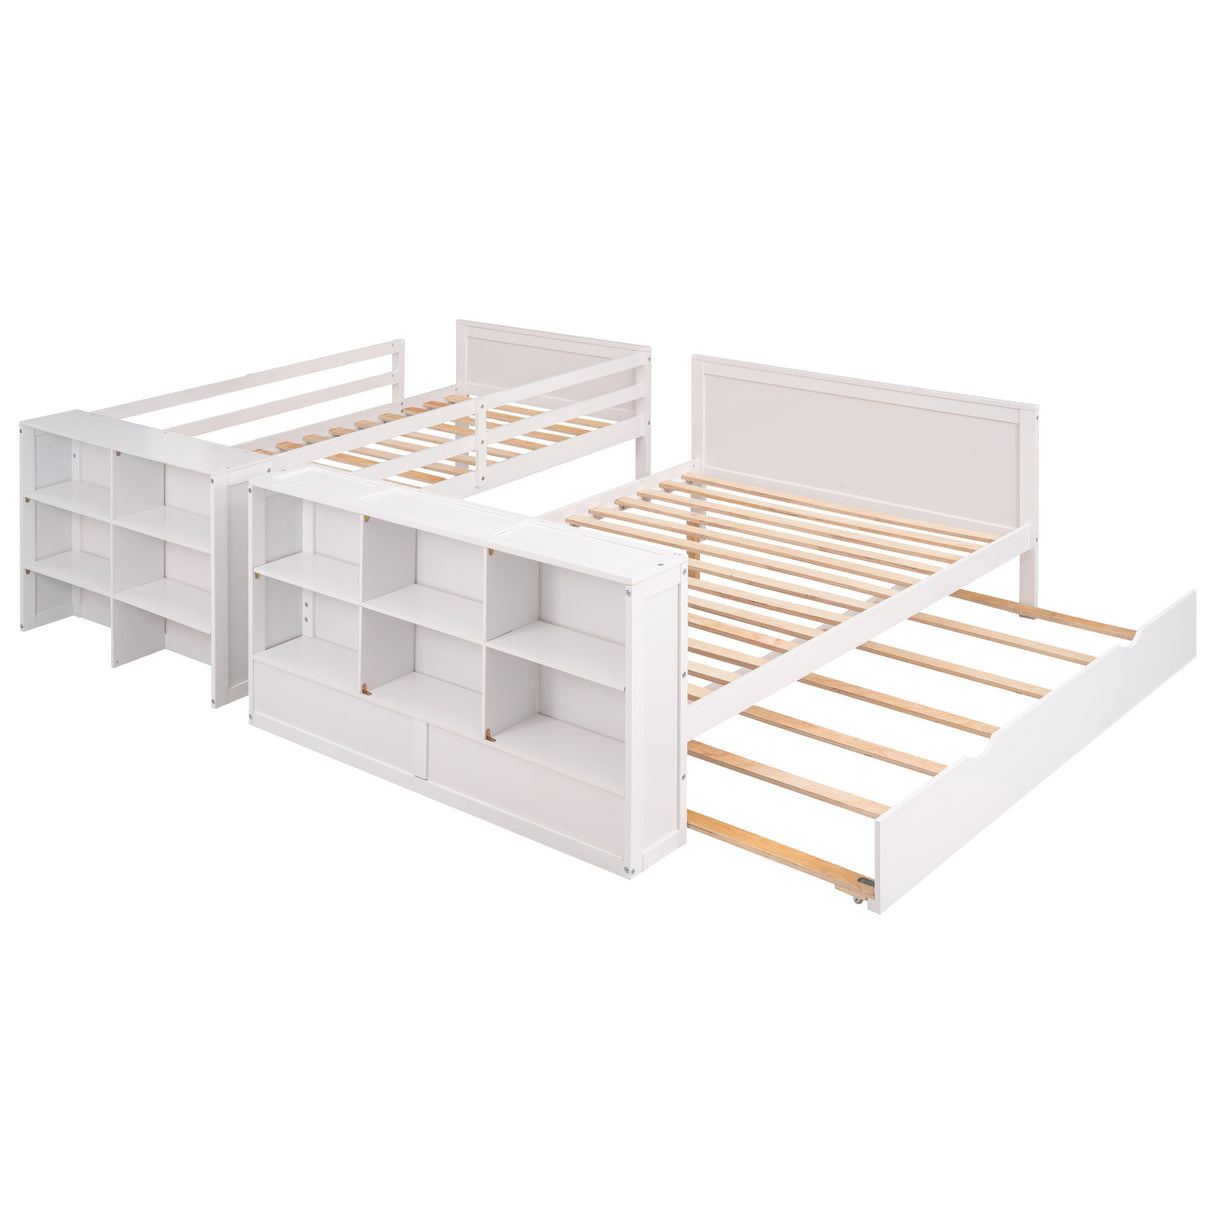 Twin over Full Bunk Bed with Trundle and Shelves, can be Separated into Three Separate Platform Beds, White - Home Elegance USA